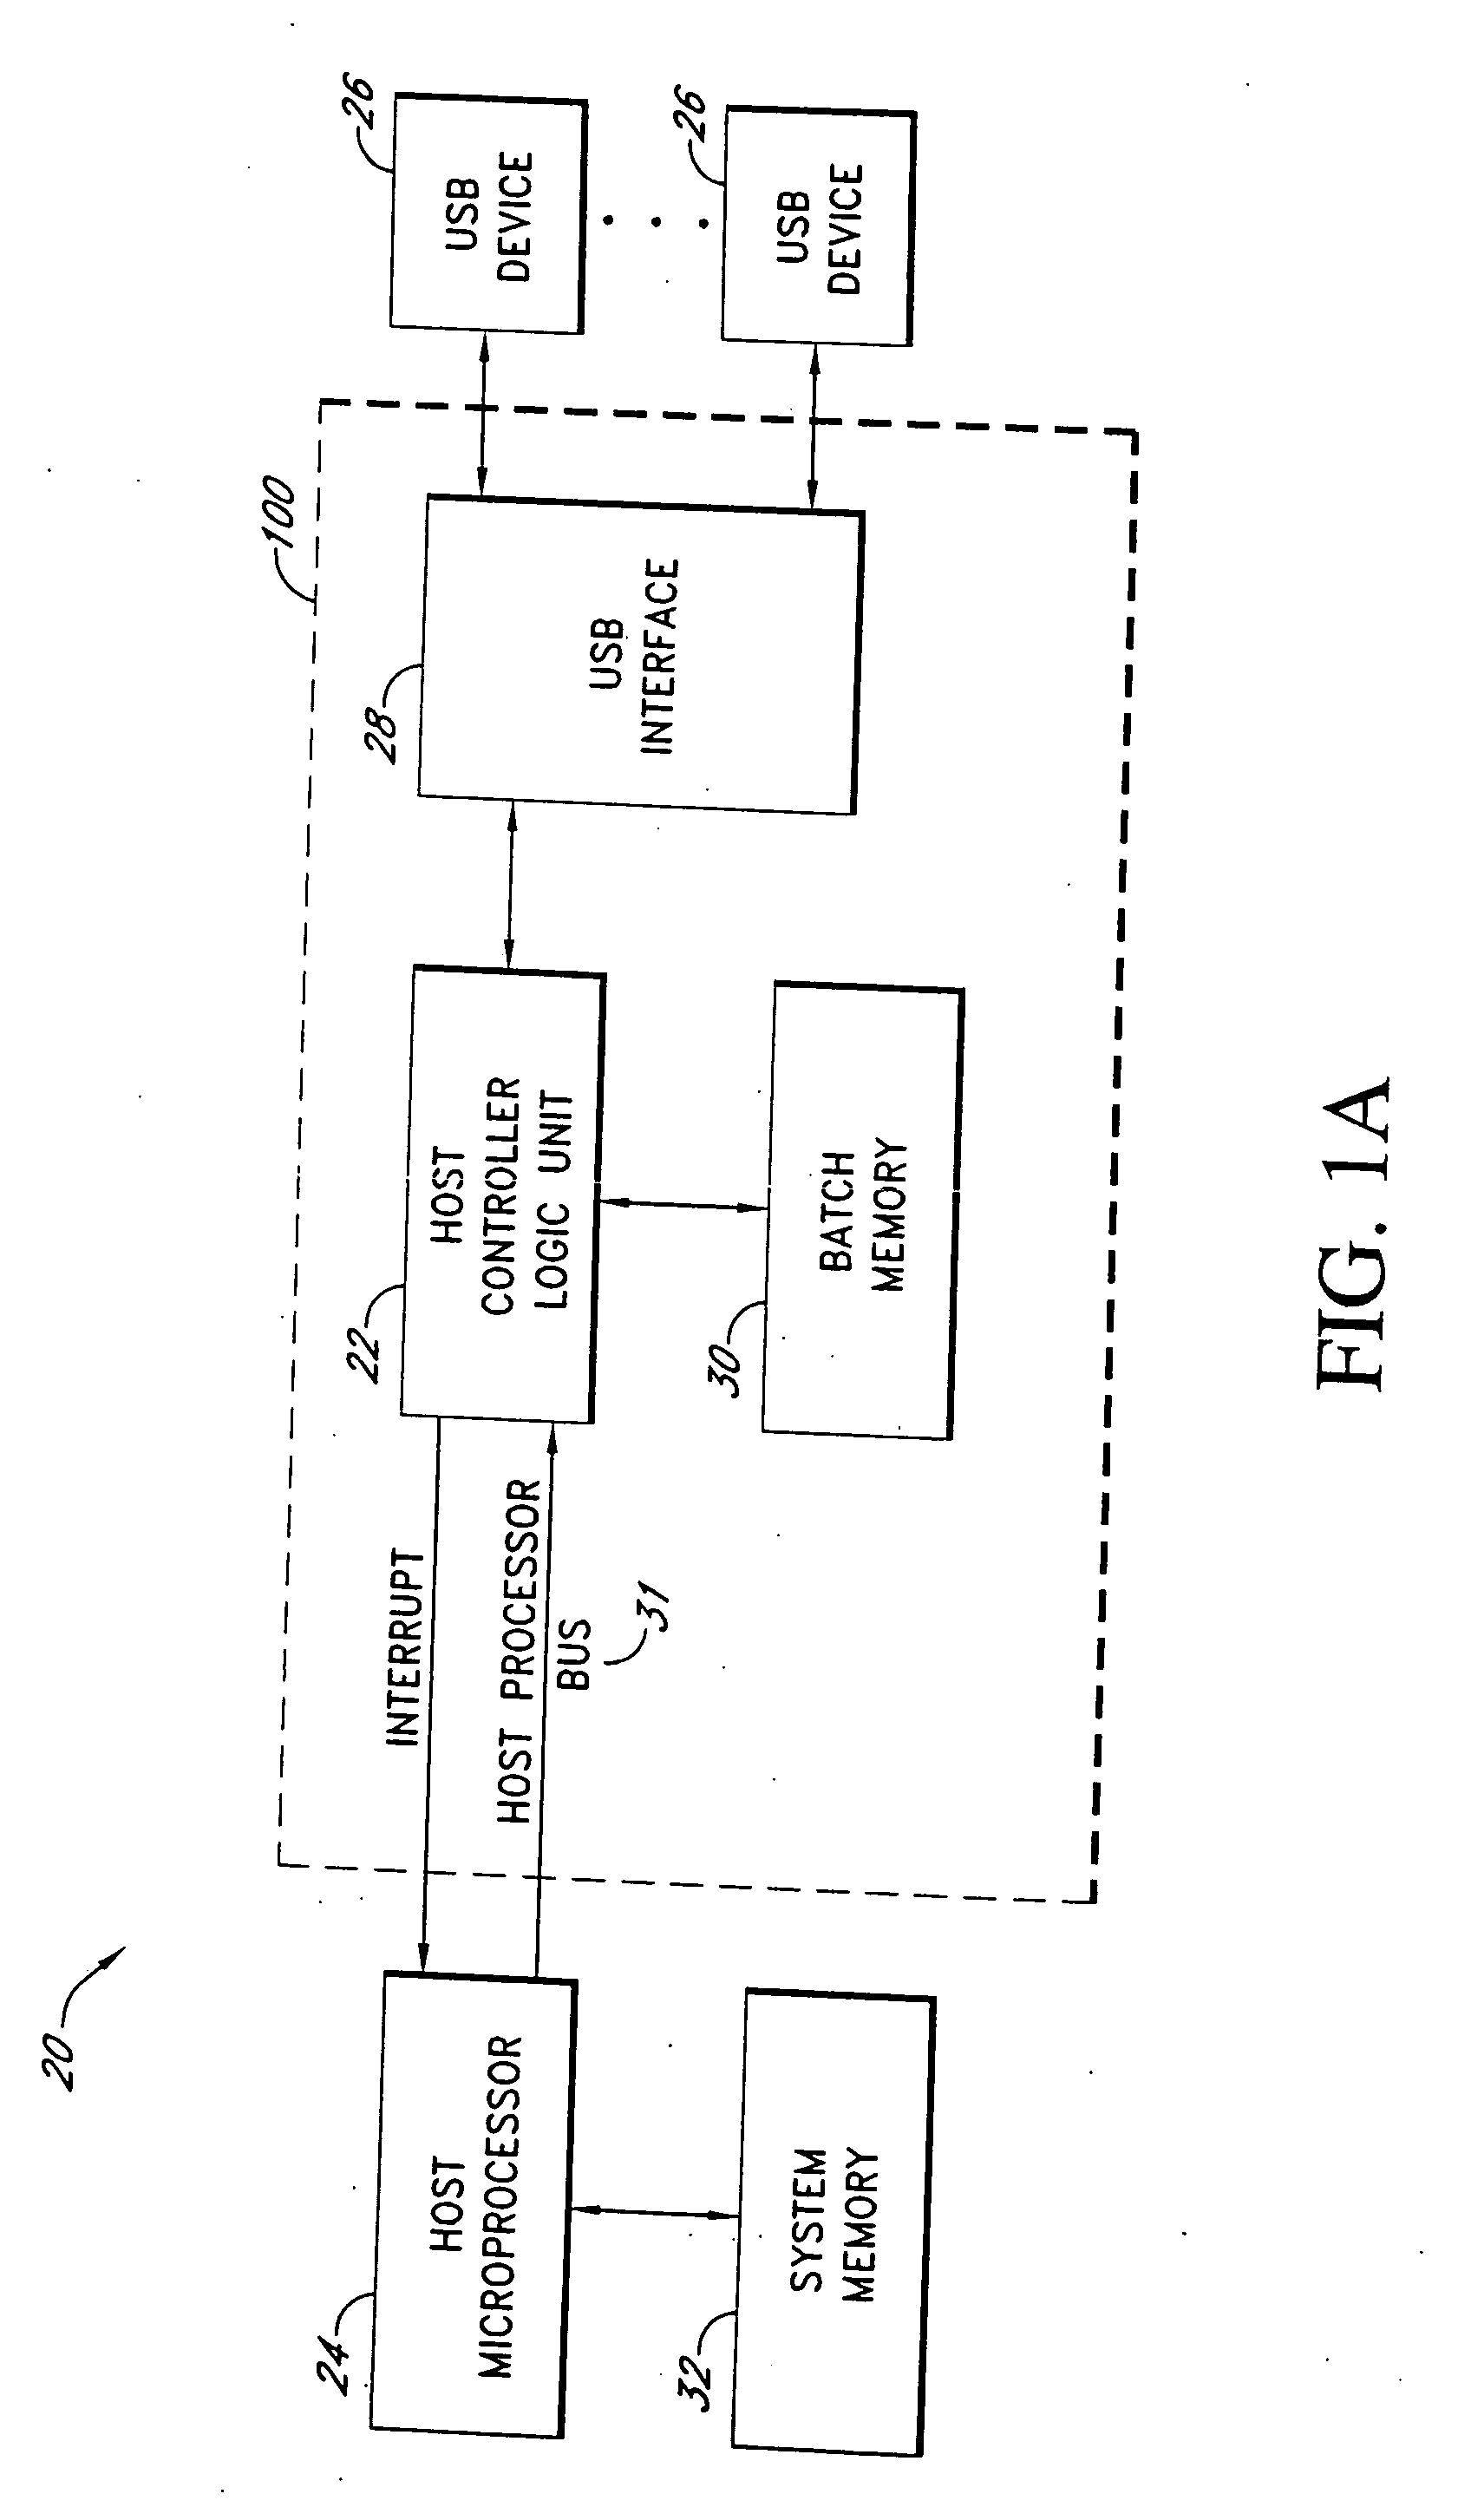 Systems and methods for batched USB data transfers